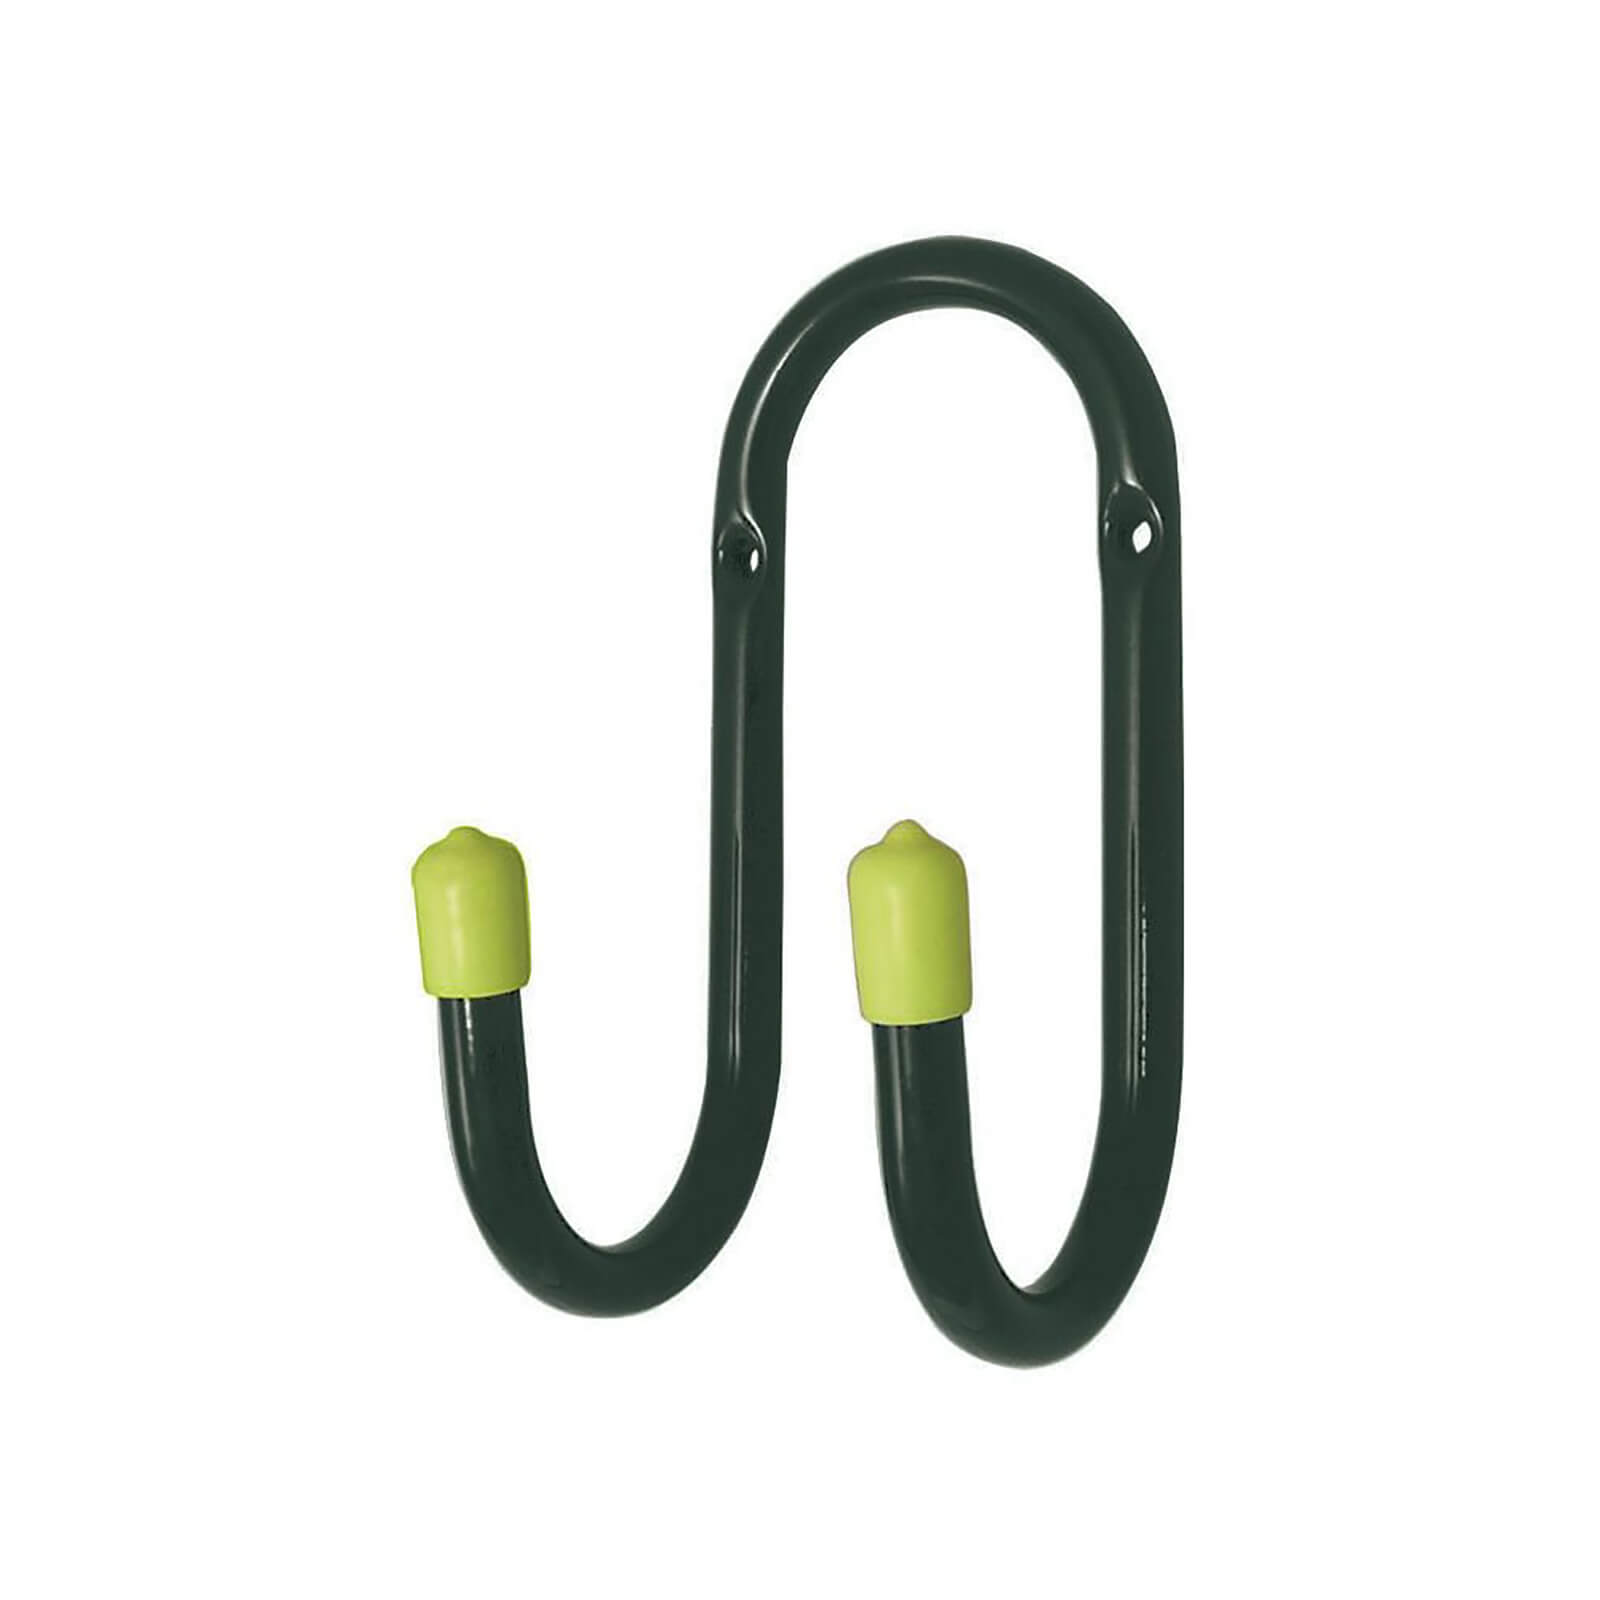 Photo of Utility Double Hook - Blue And Green - 70mm - 3 Pack